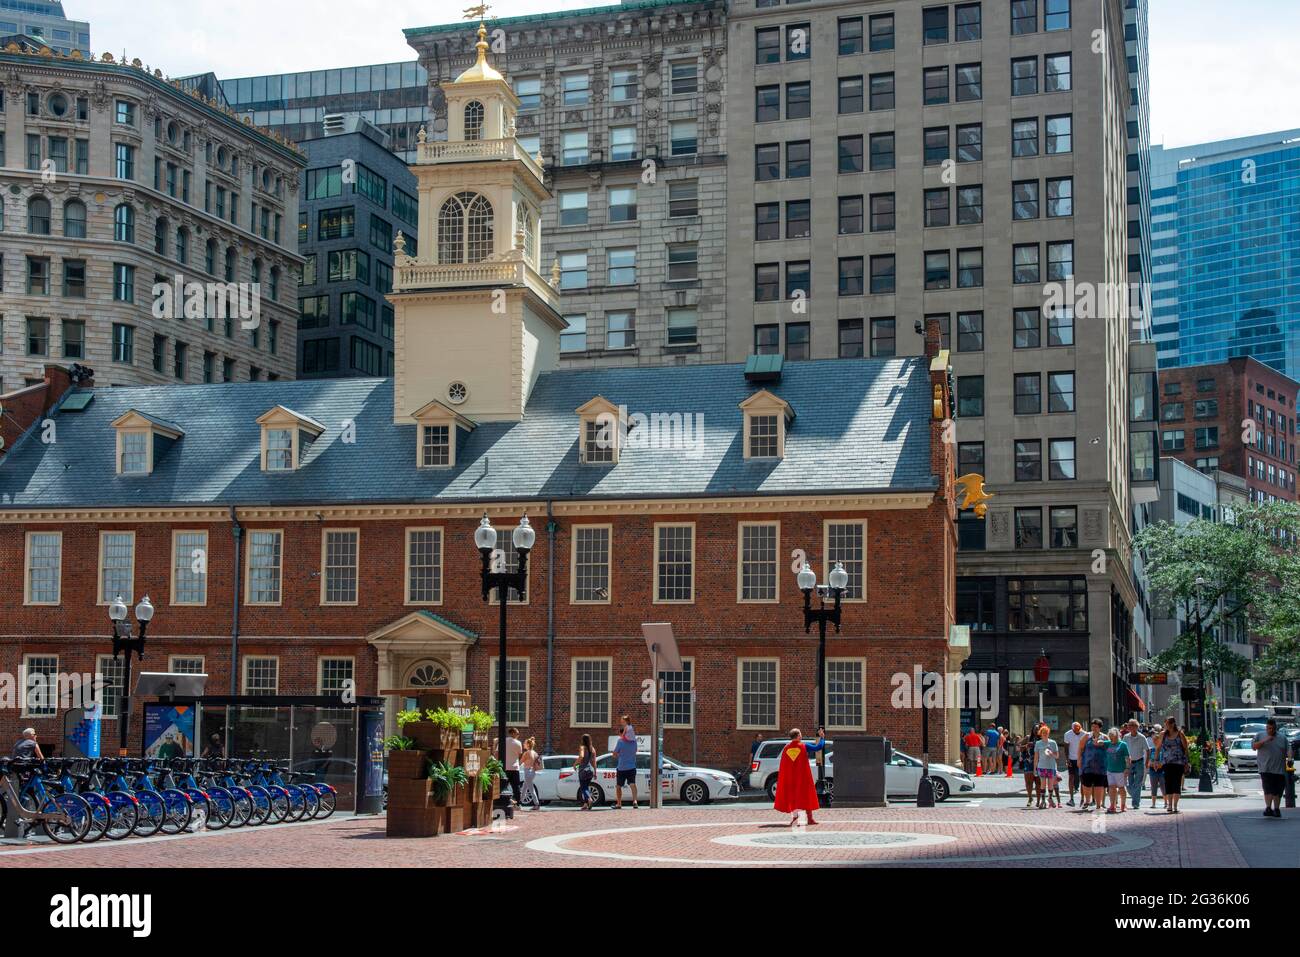 The Old State House, Boston. The historic site of the Declaration of Independence being read from the balcony in 1776. Downtown Crossing area of Bosto Stock Photo